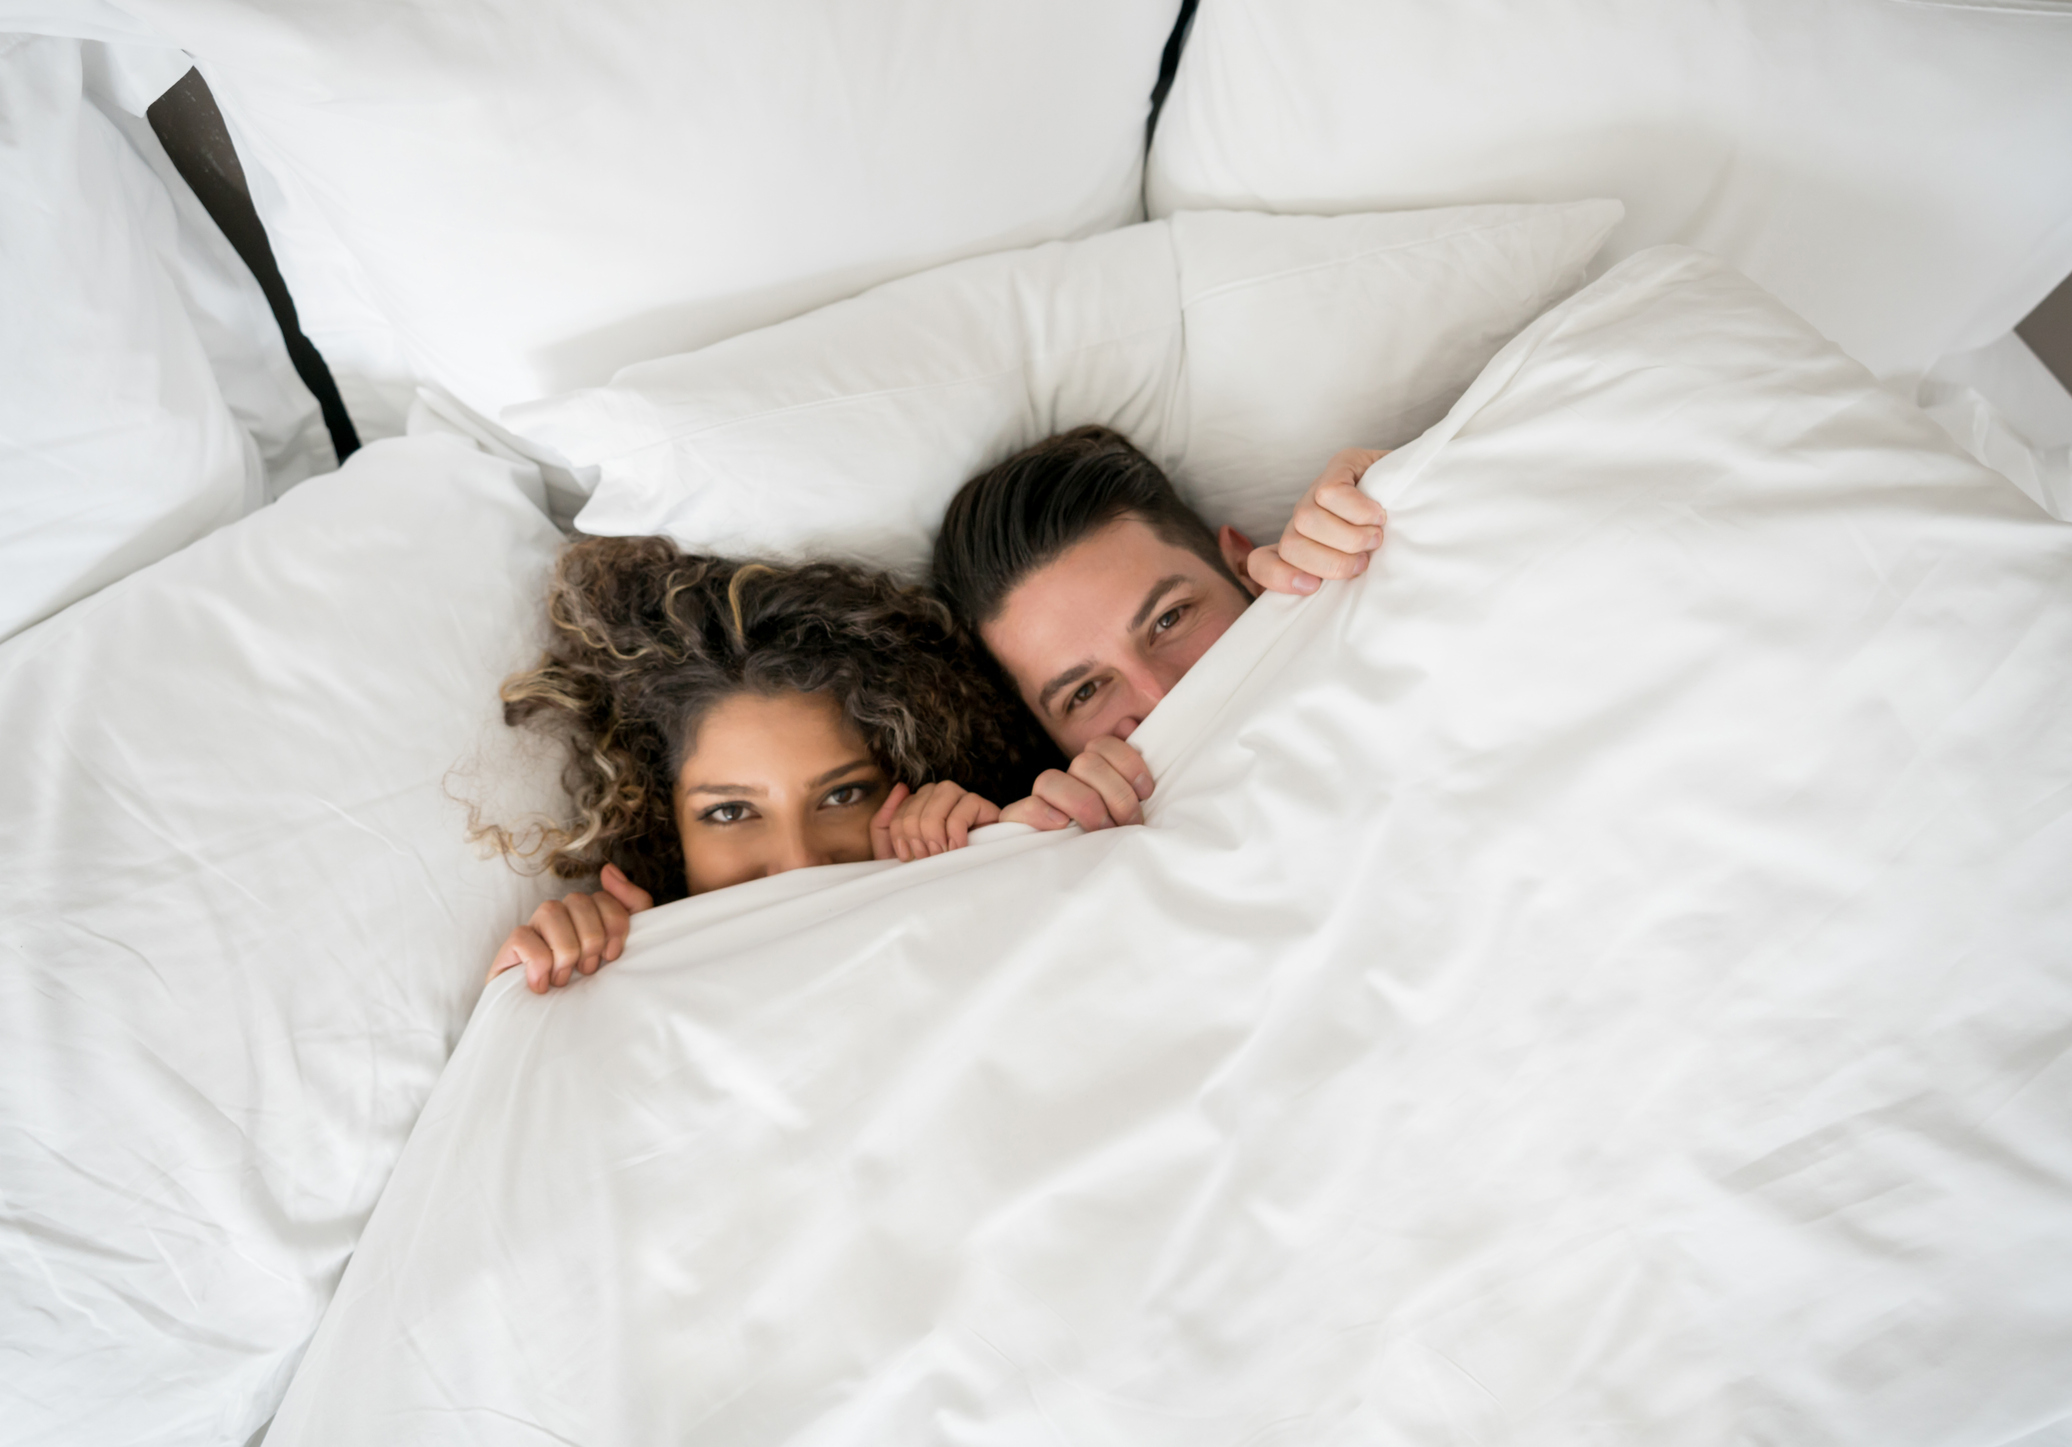 5 Tips to Sleep Better With Your Spouse